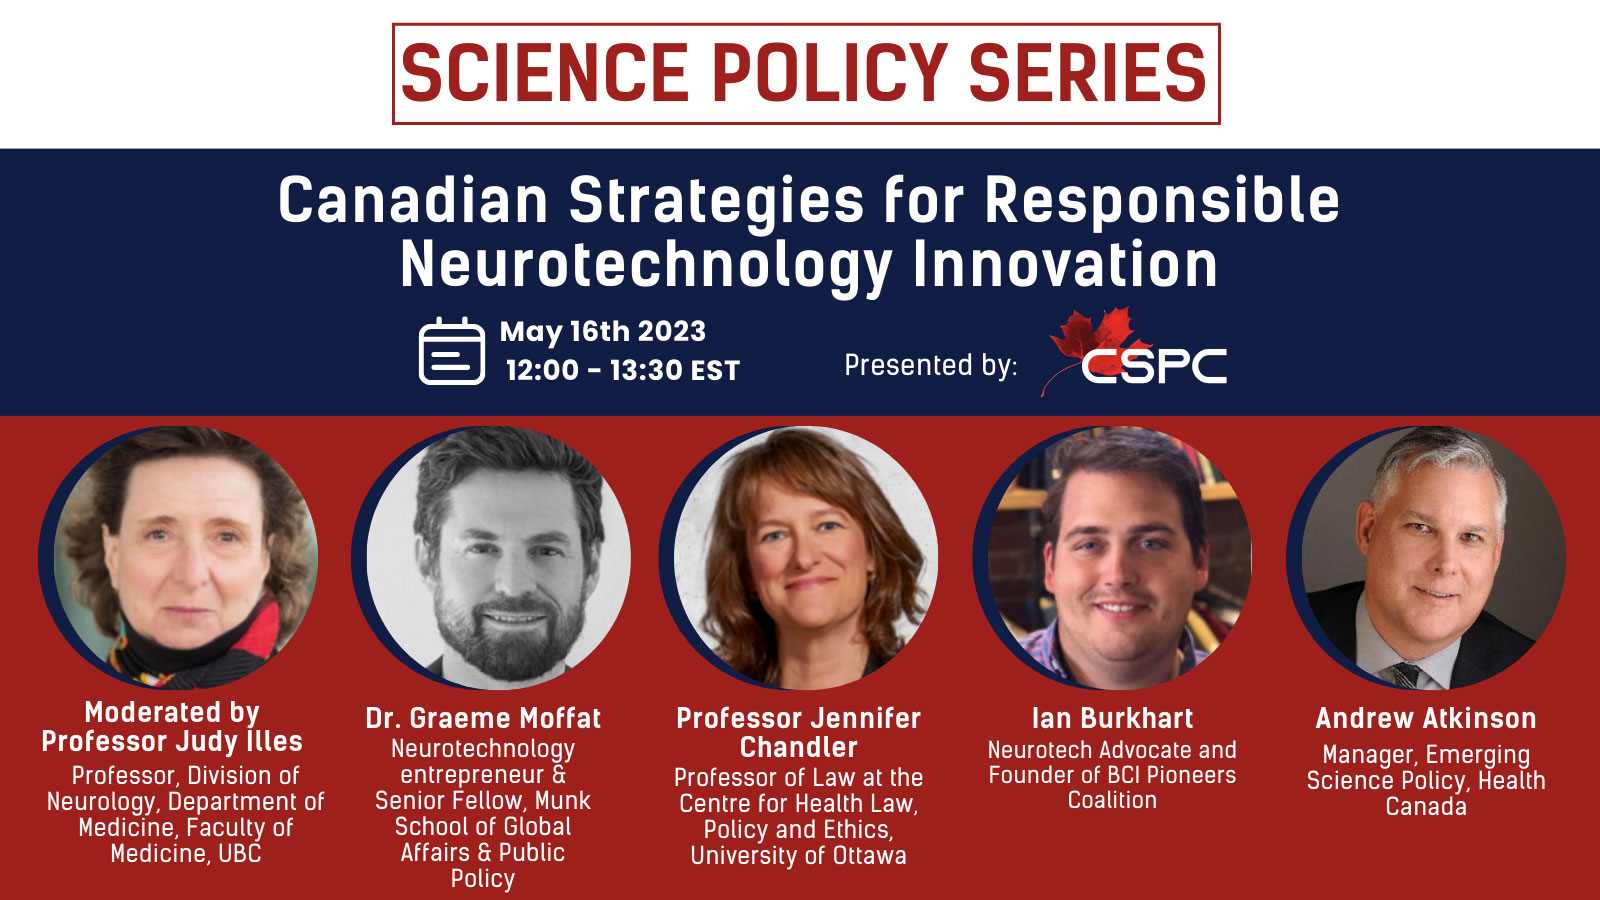 Banner for "Canadian Strategies for Responsible Neurotechnology Innovation" panel on May 16, 2023